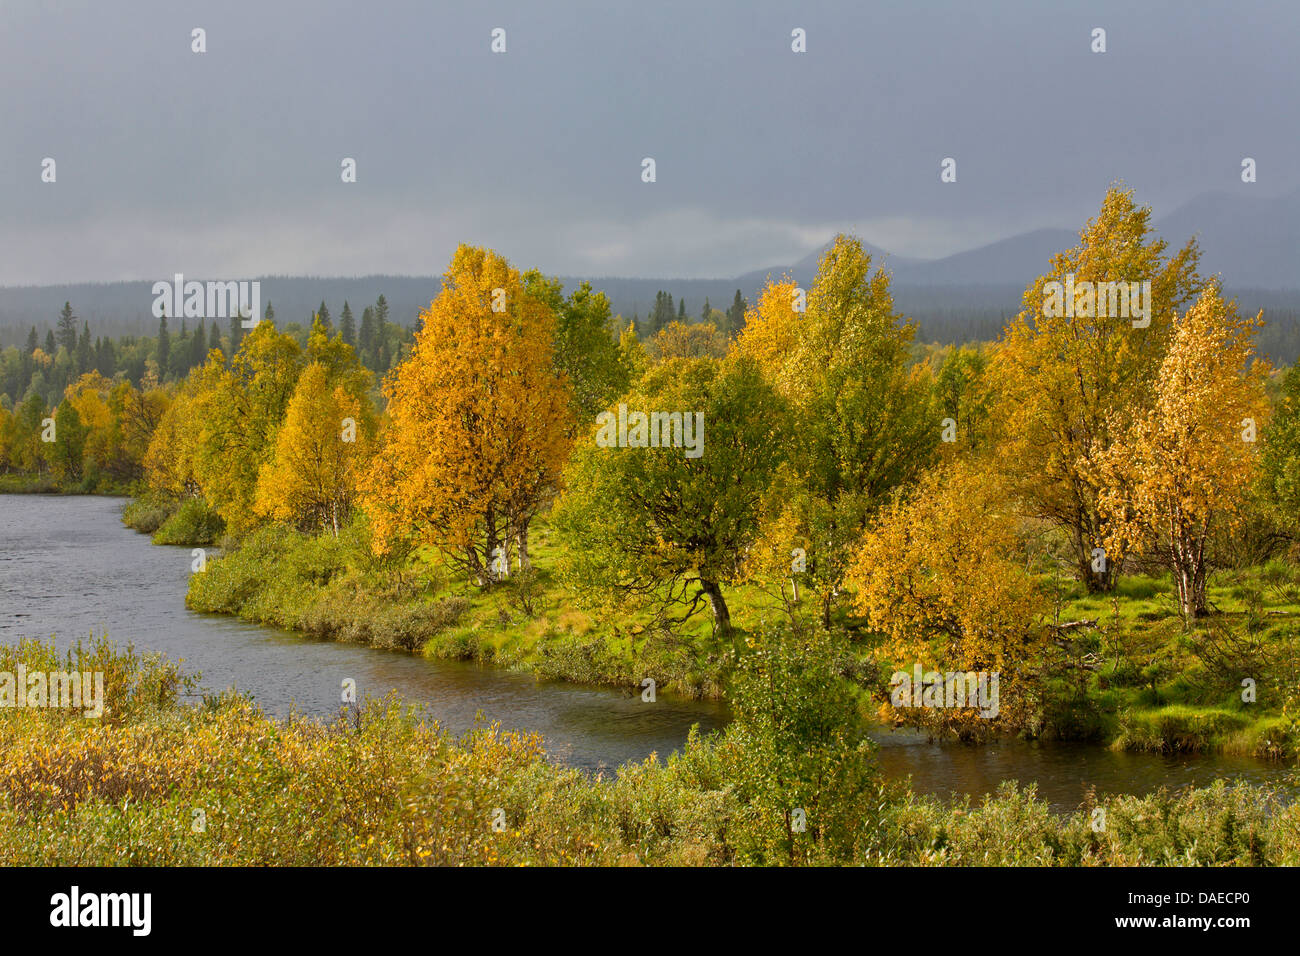 downy birch (Betula pubescens), torrent and  downy birches in autumn, Sweden, Lapland, Marsfjaellen Naturreservat, Marsfjaellen Naturreservat Stock Photo